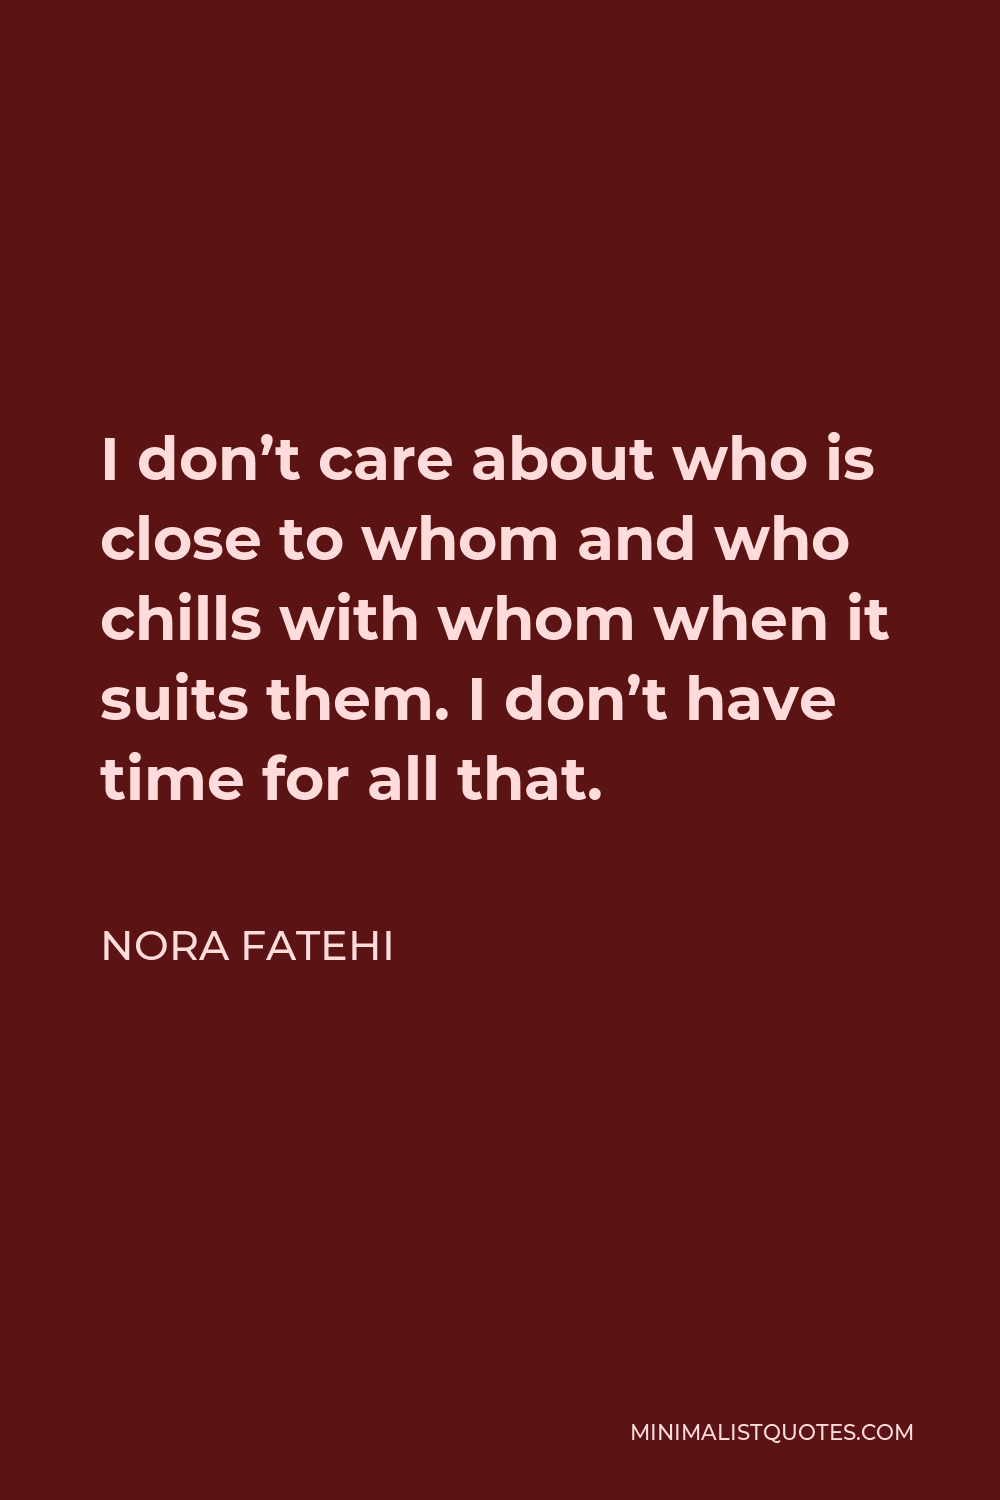 Nora Fatehi Quote - I don’t care about who is close to whom and who chills with whom when it suits them. I don’t have time for all that.